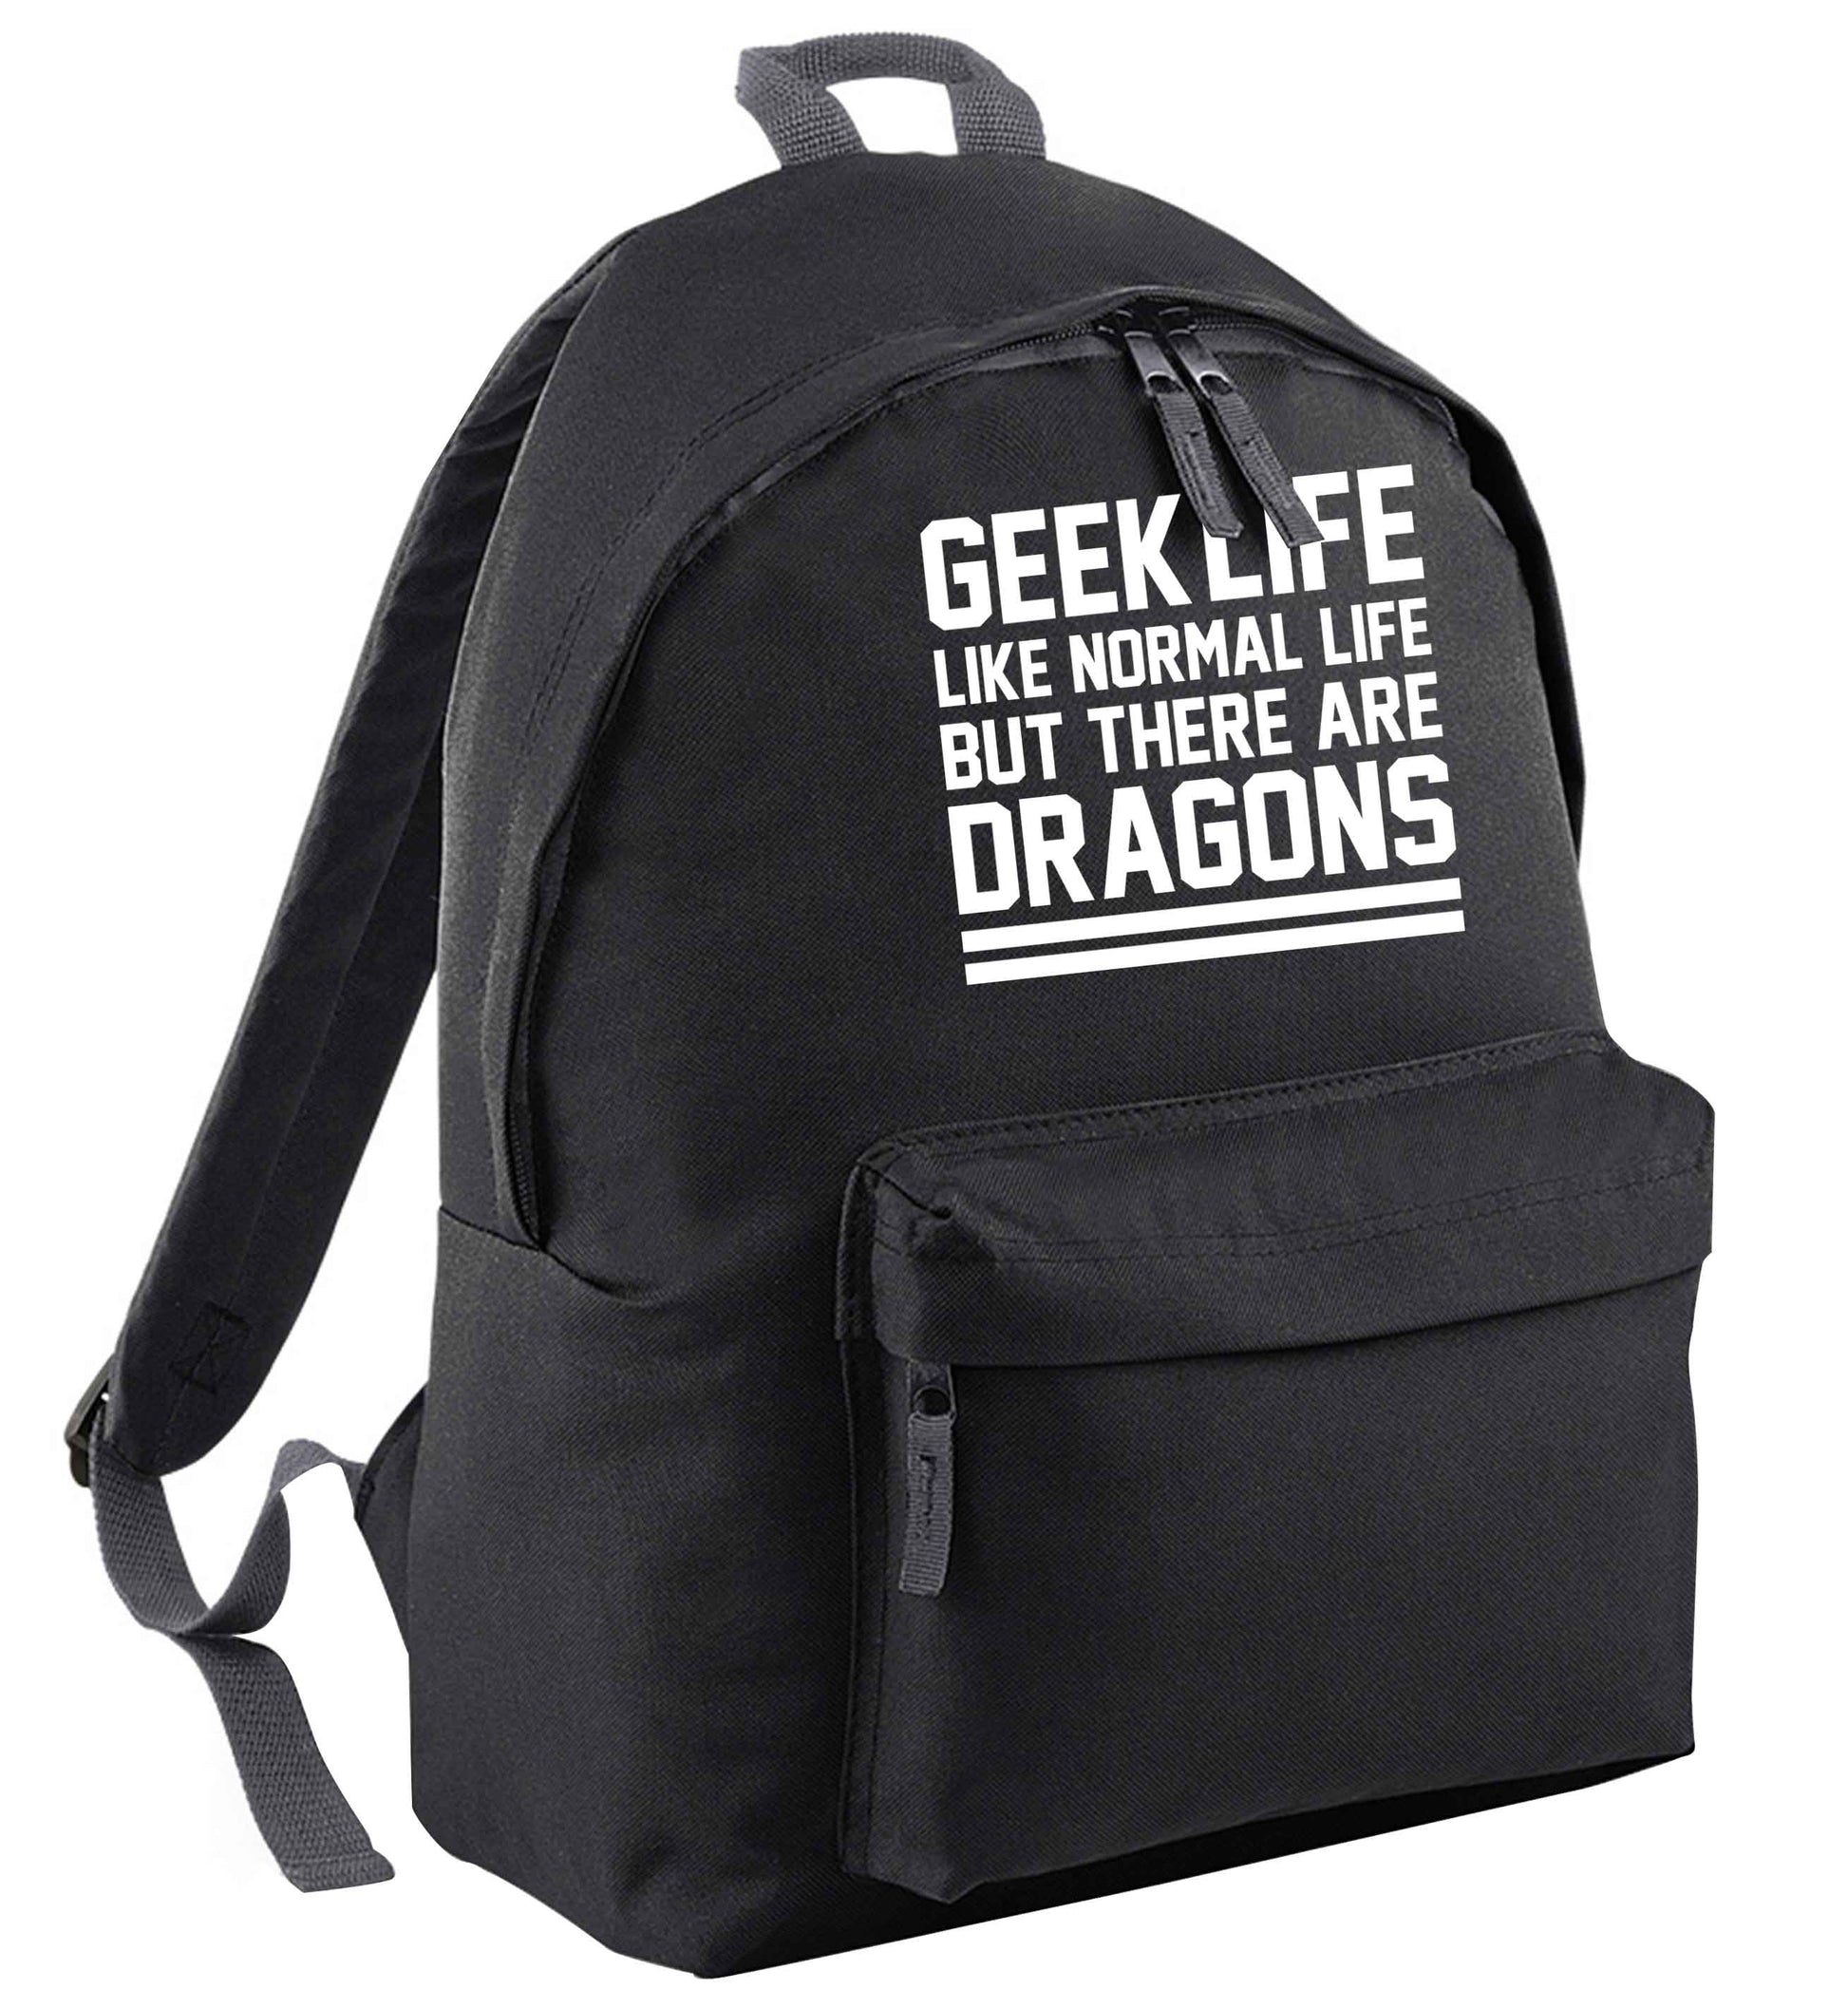 Geek life like normal life but there are dragons black adults backpack